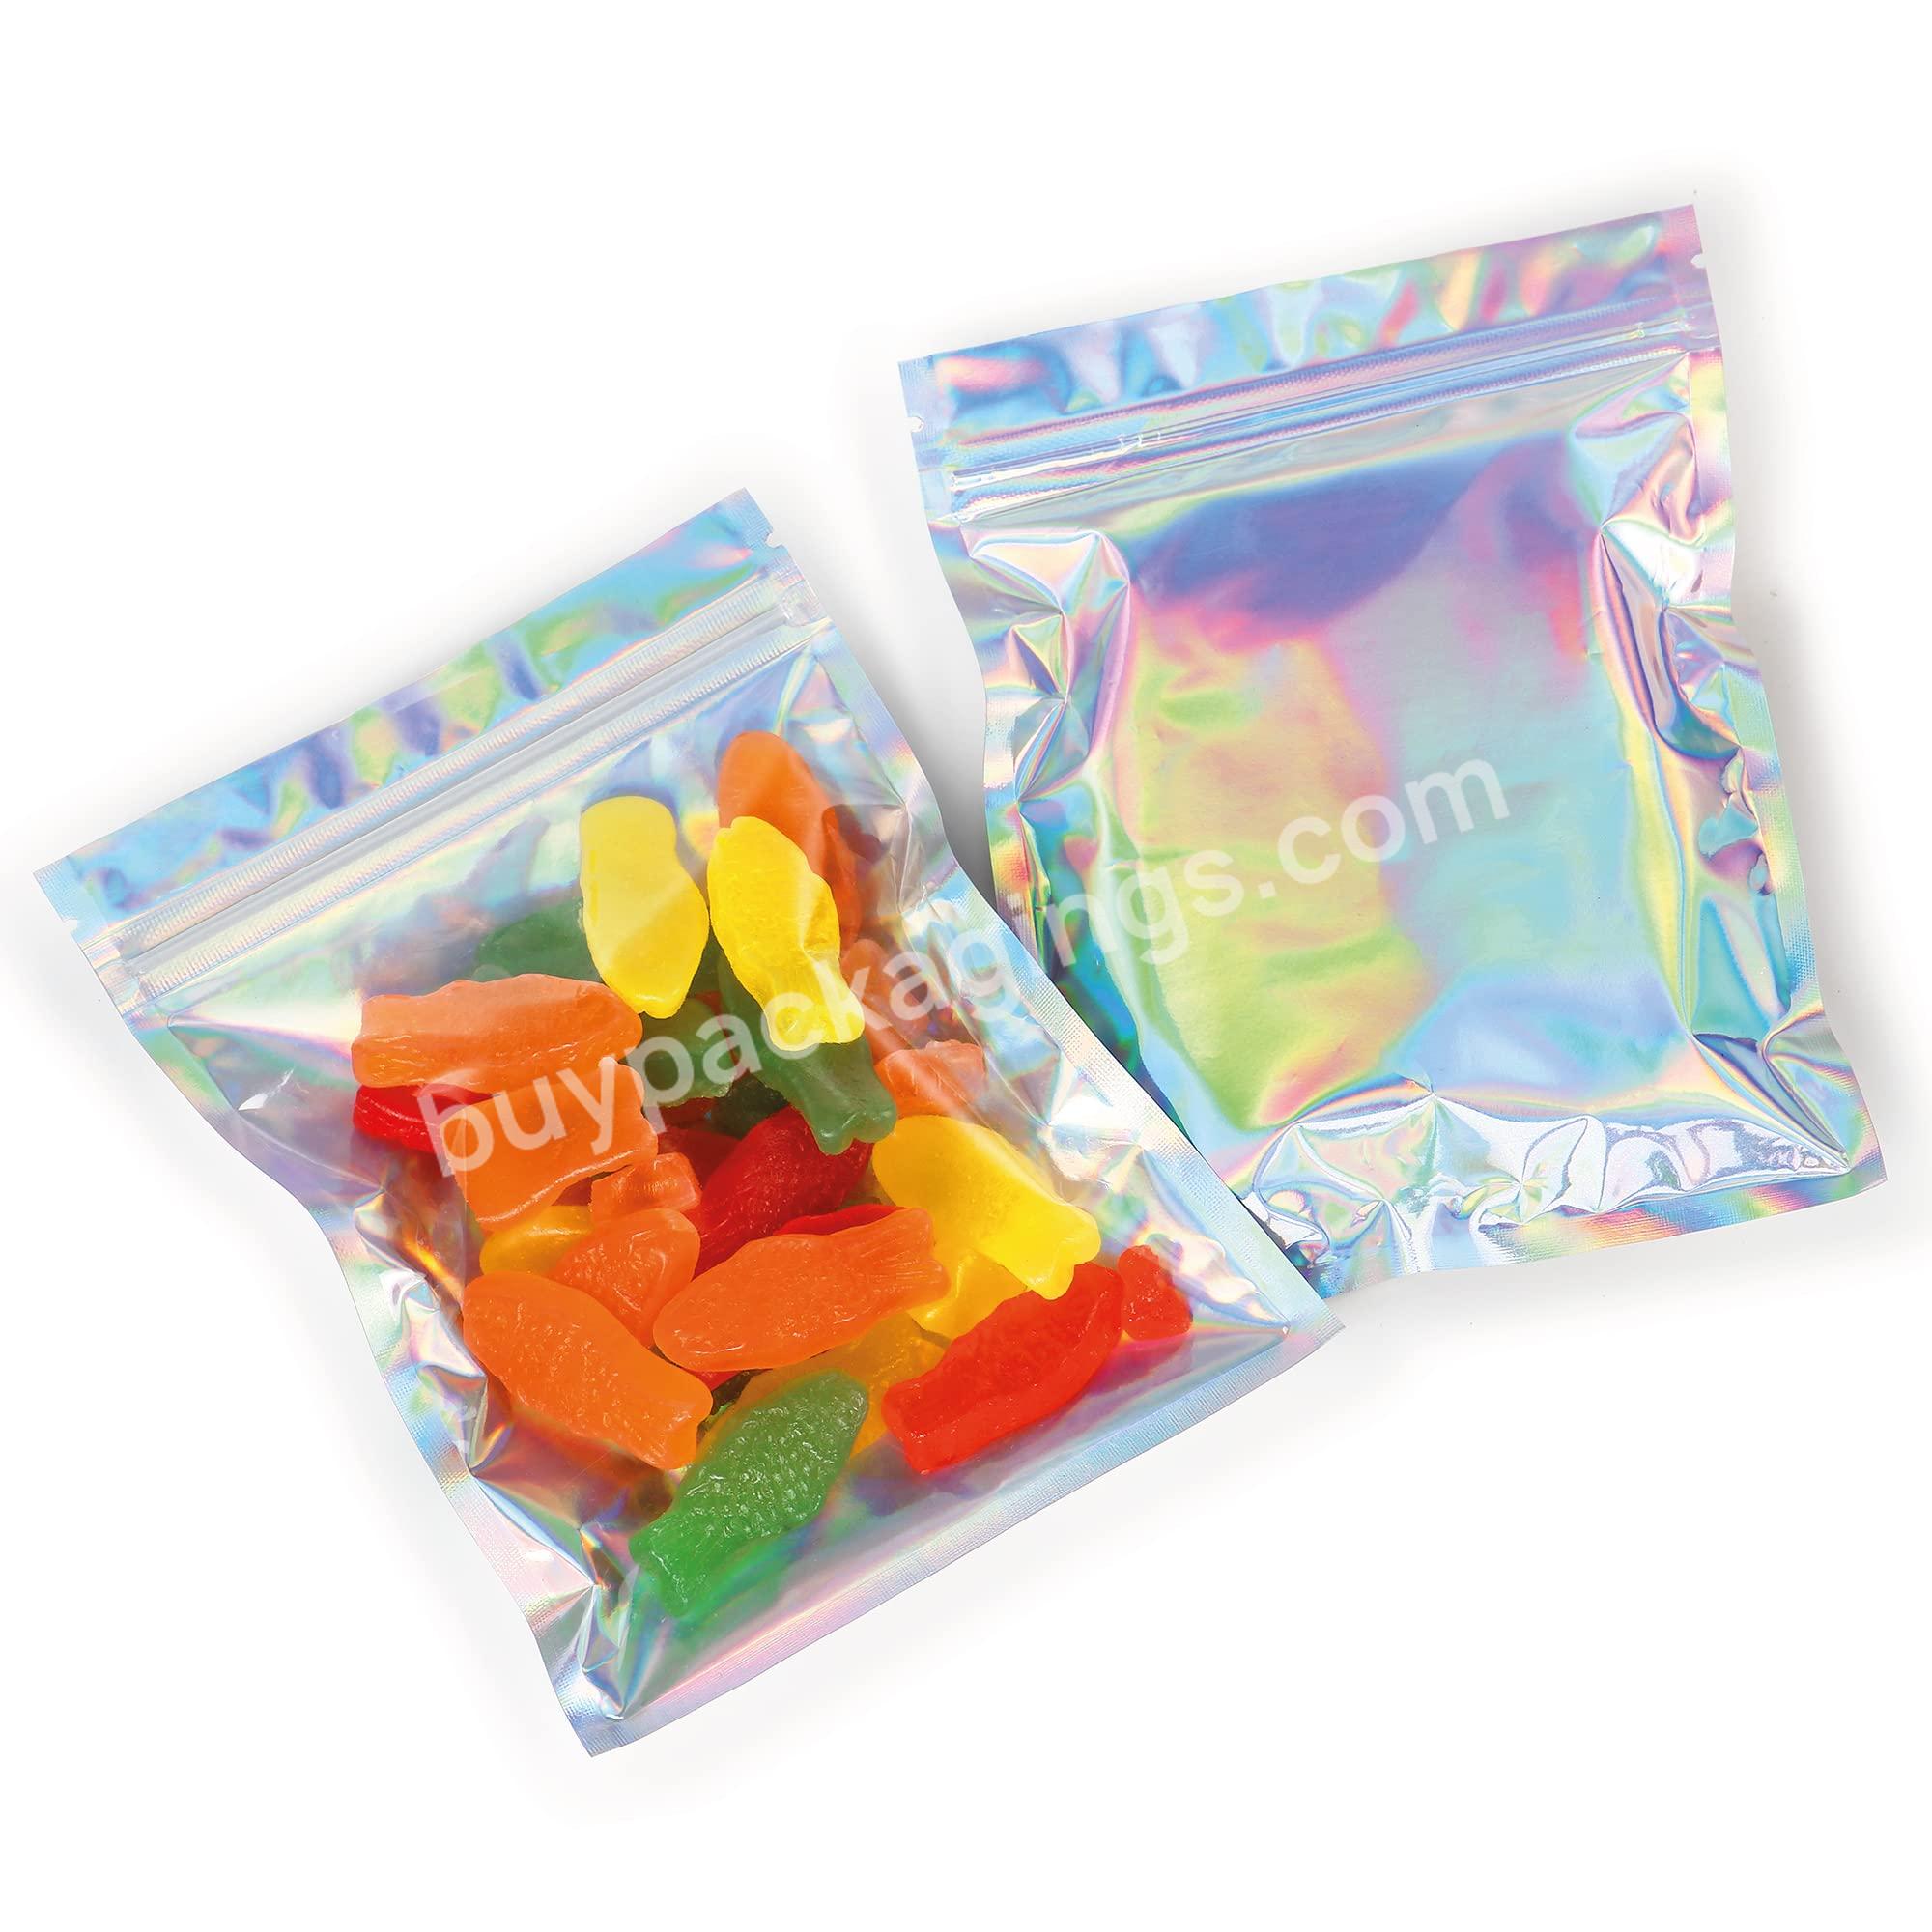 Clear Front Mylar Bags With Ziplock Rainbow Holographic Sealable Heat Seal Bag For Candy And Food Packaging - Buy Rainbow Holographic Sealable Heat Seal Bag,Bag For Candy And Food Packaging,Mylar Bags With Ziplock.